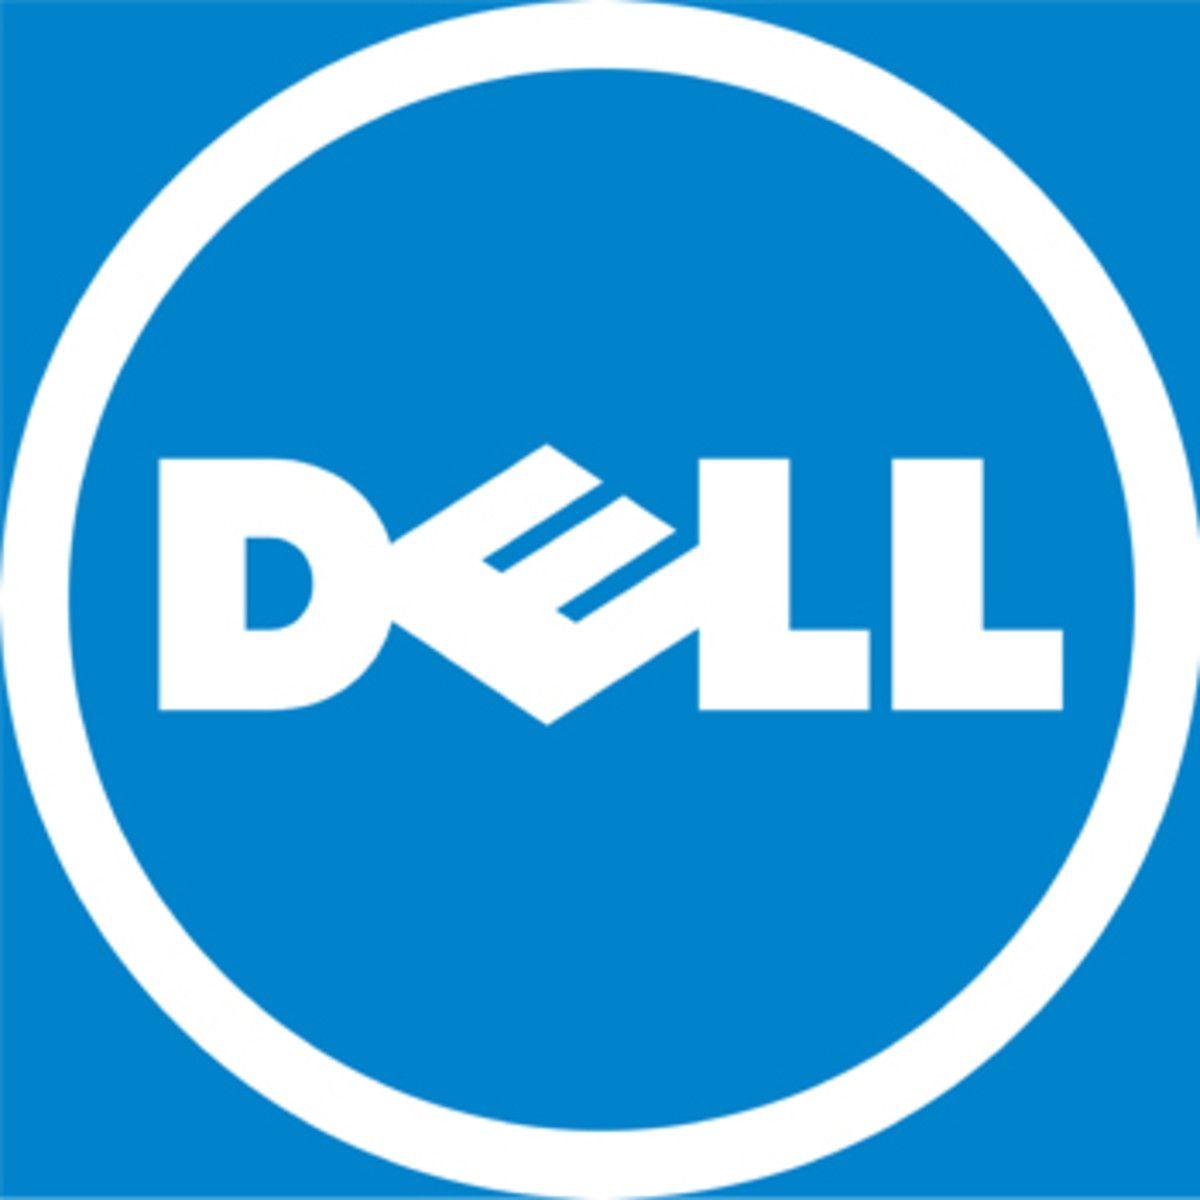 Dell Technologies Logo - Why Dell has changed its name to Dell Technologies